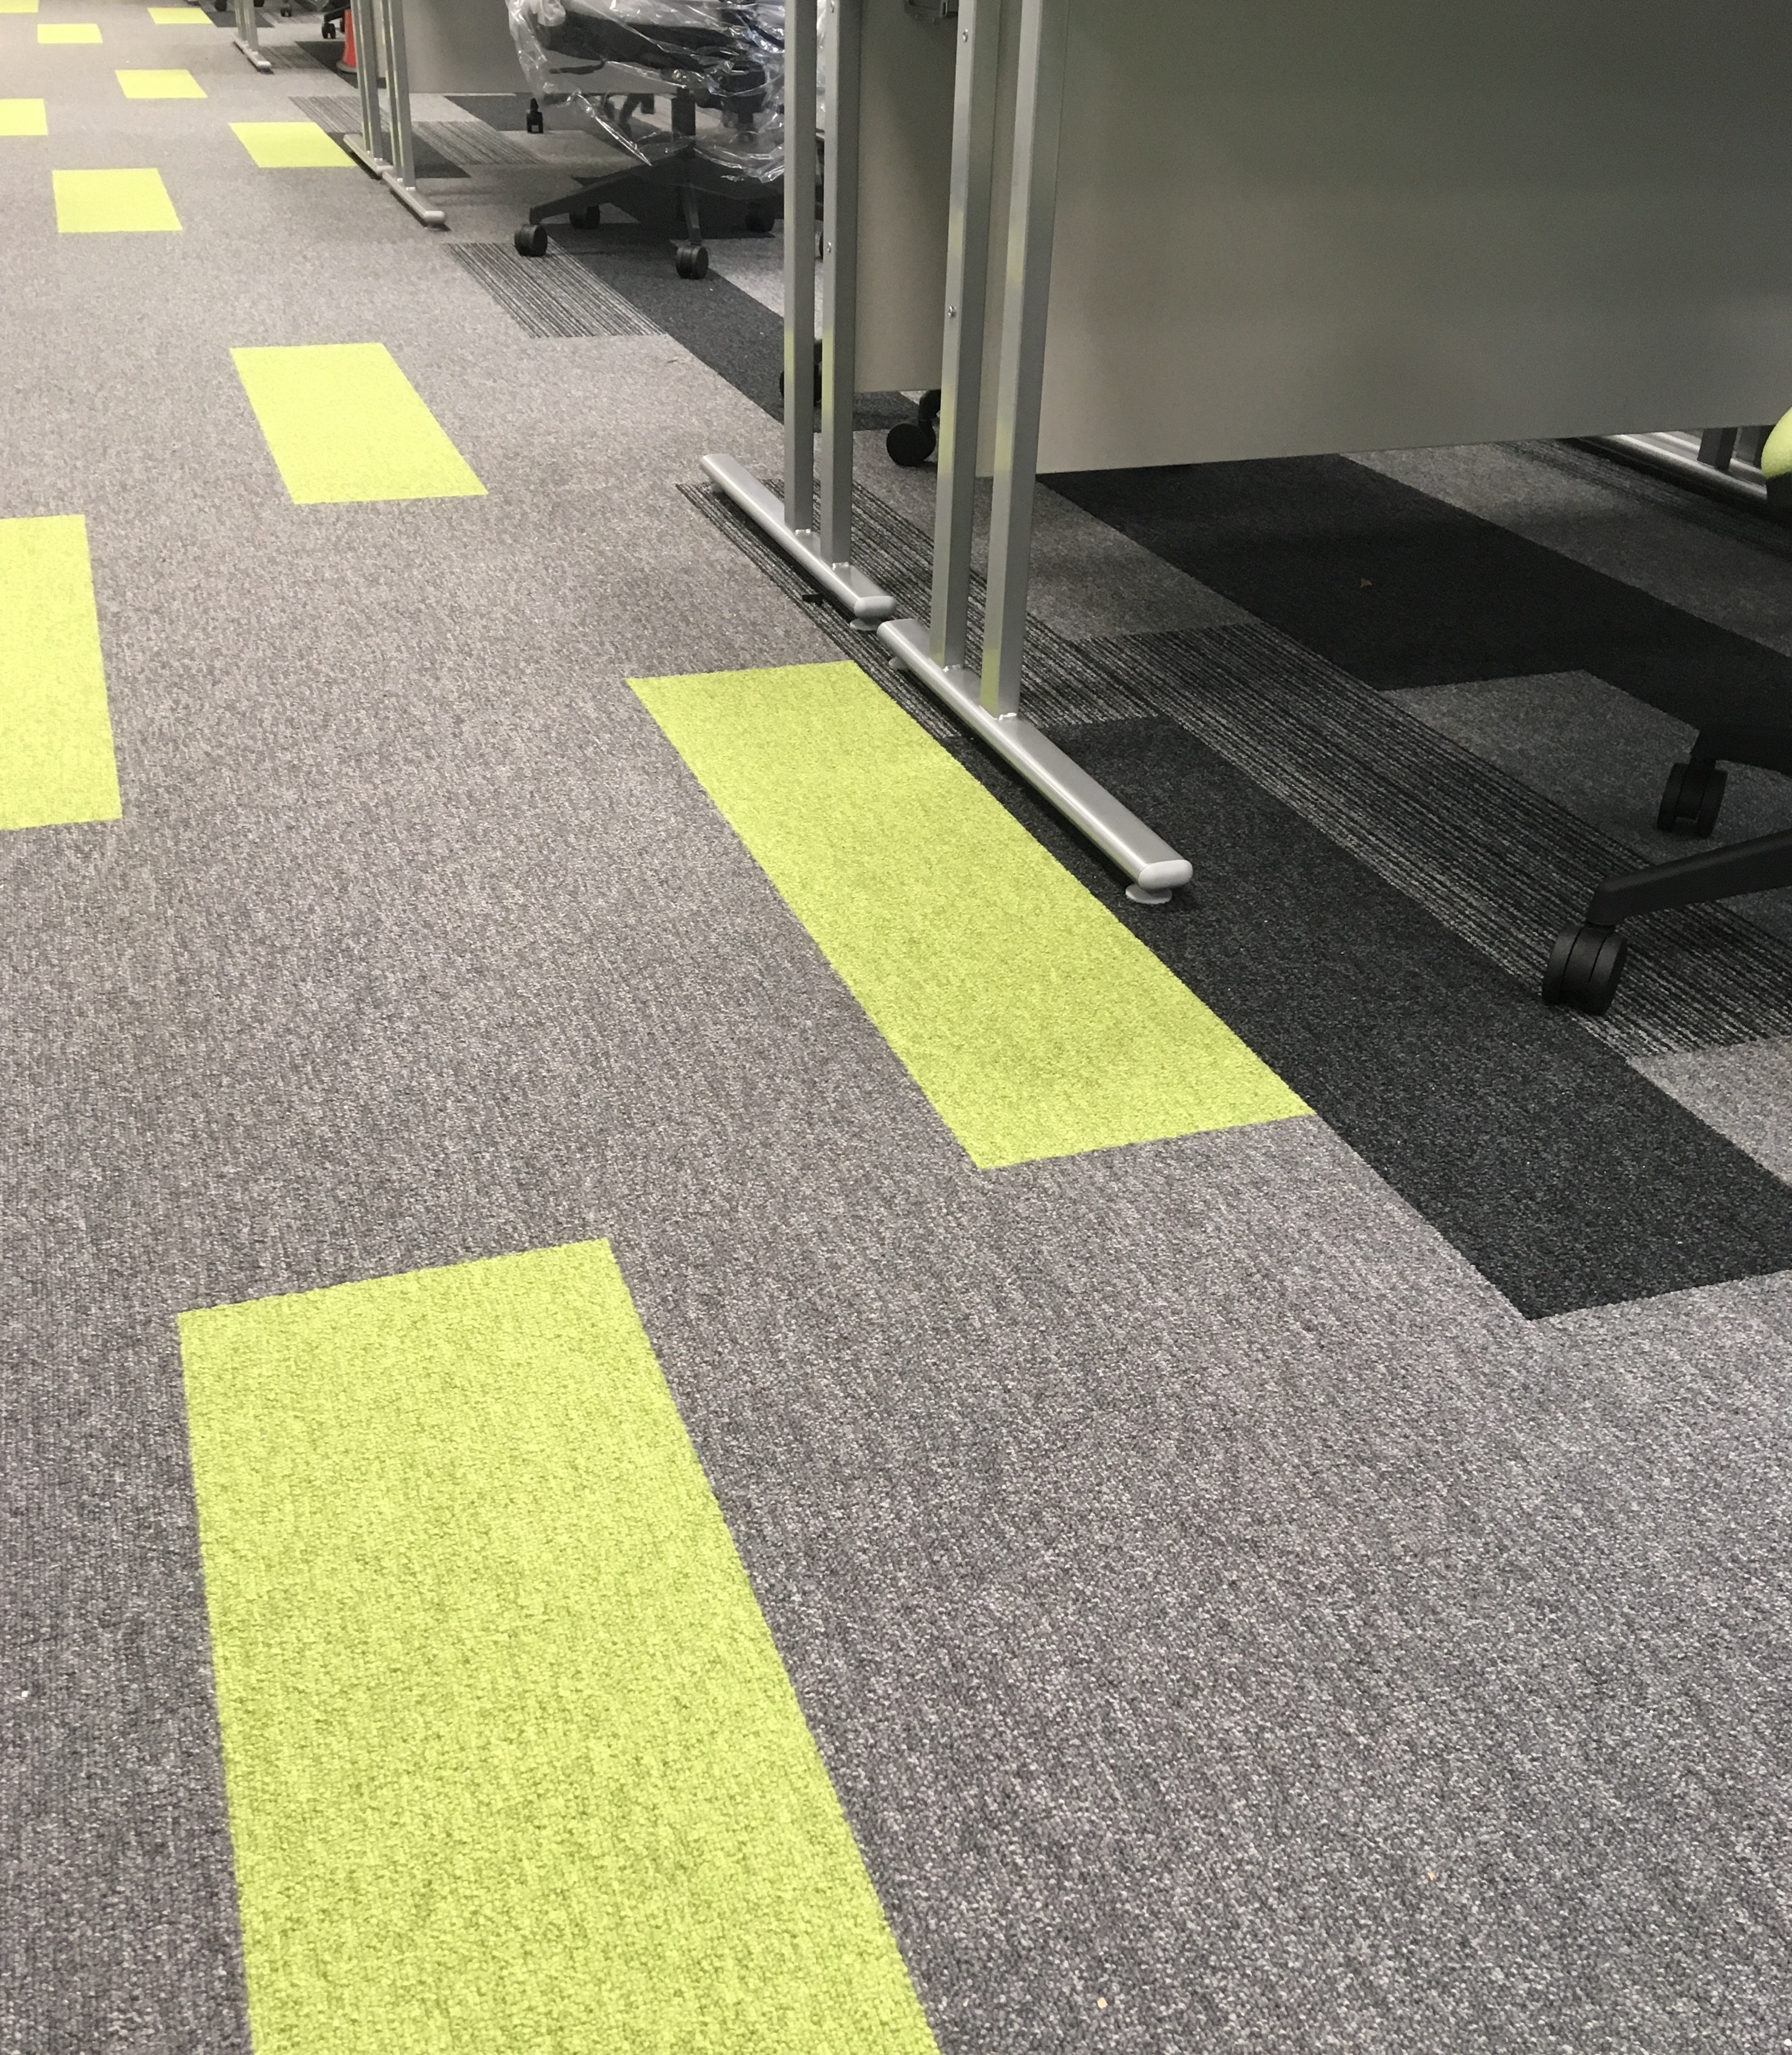 A Cumberlidge install new flooring throughout the new Patients' Booking Hub for Sheffield Teaching Hospitals NHS Foundation Trust